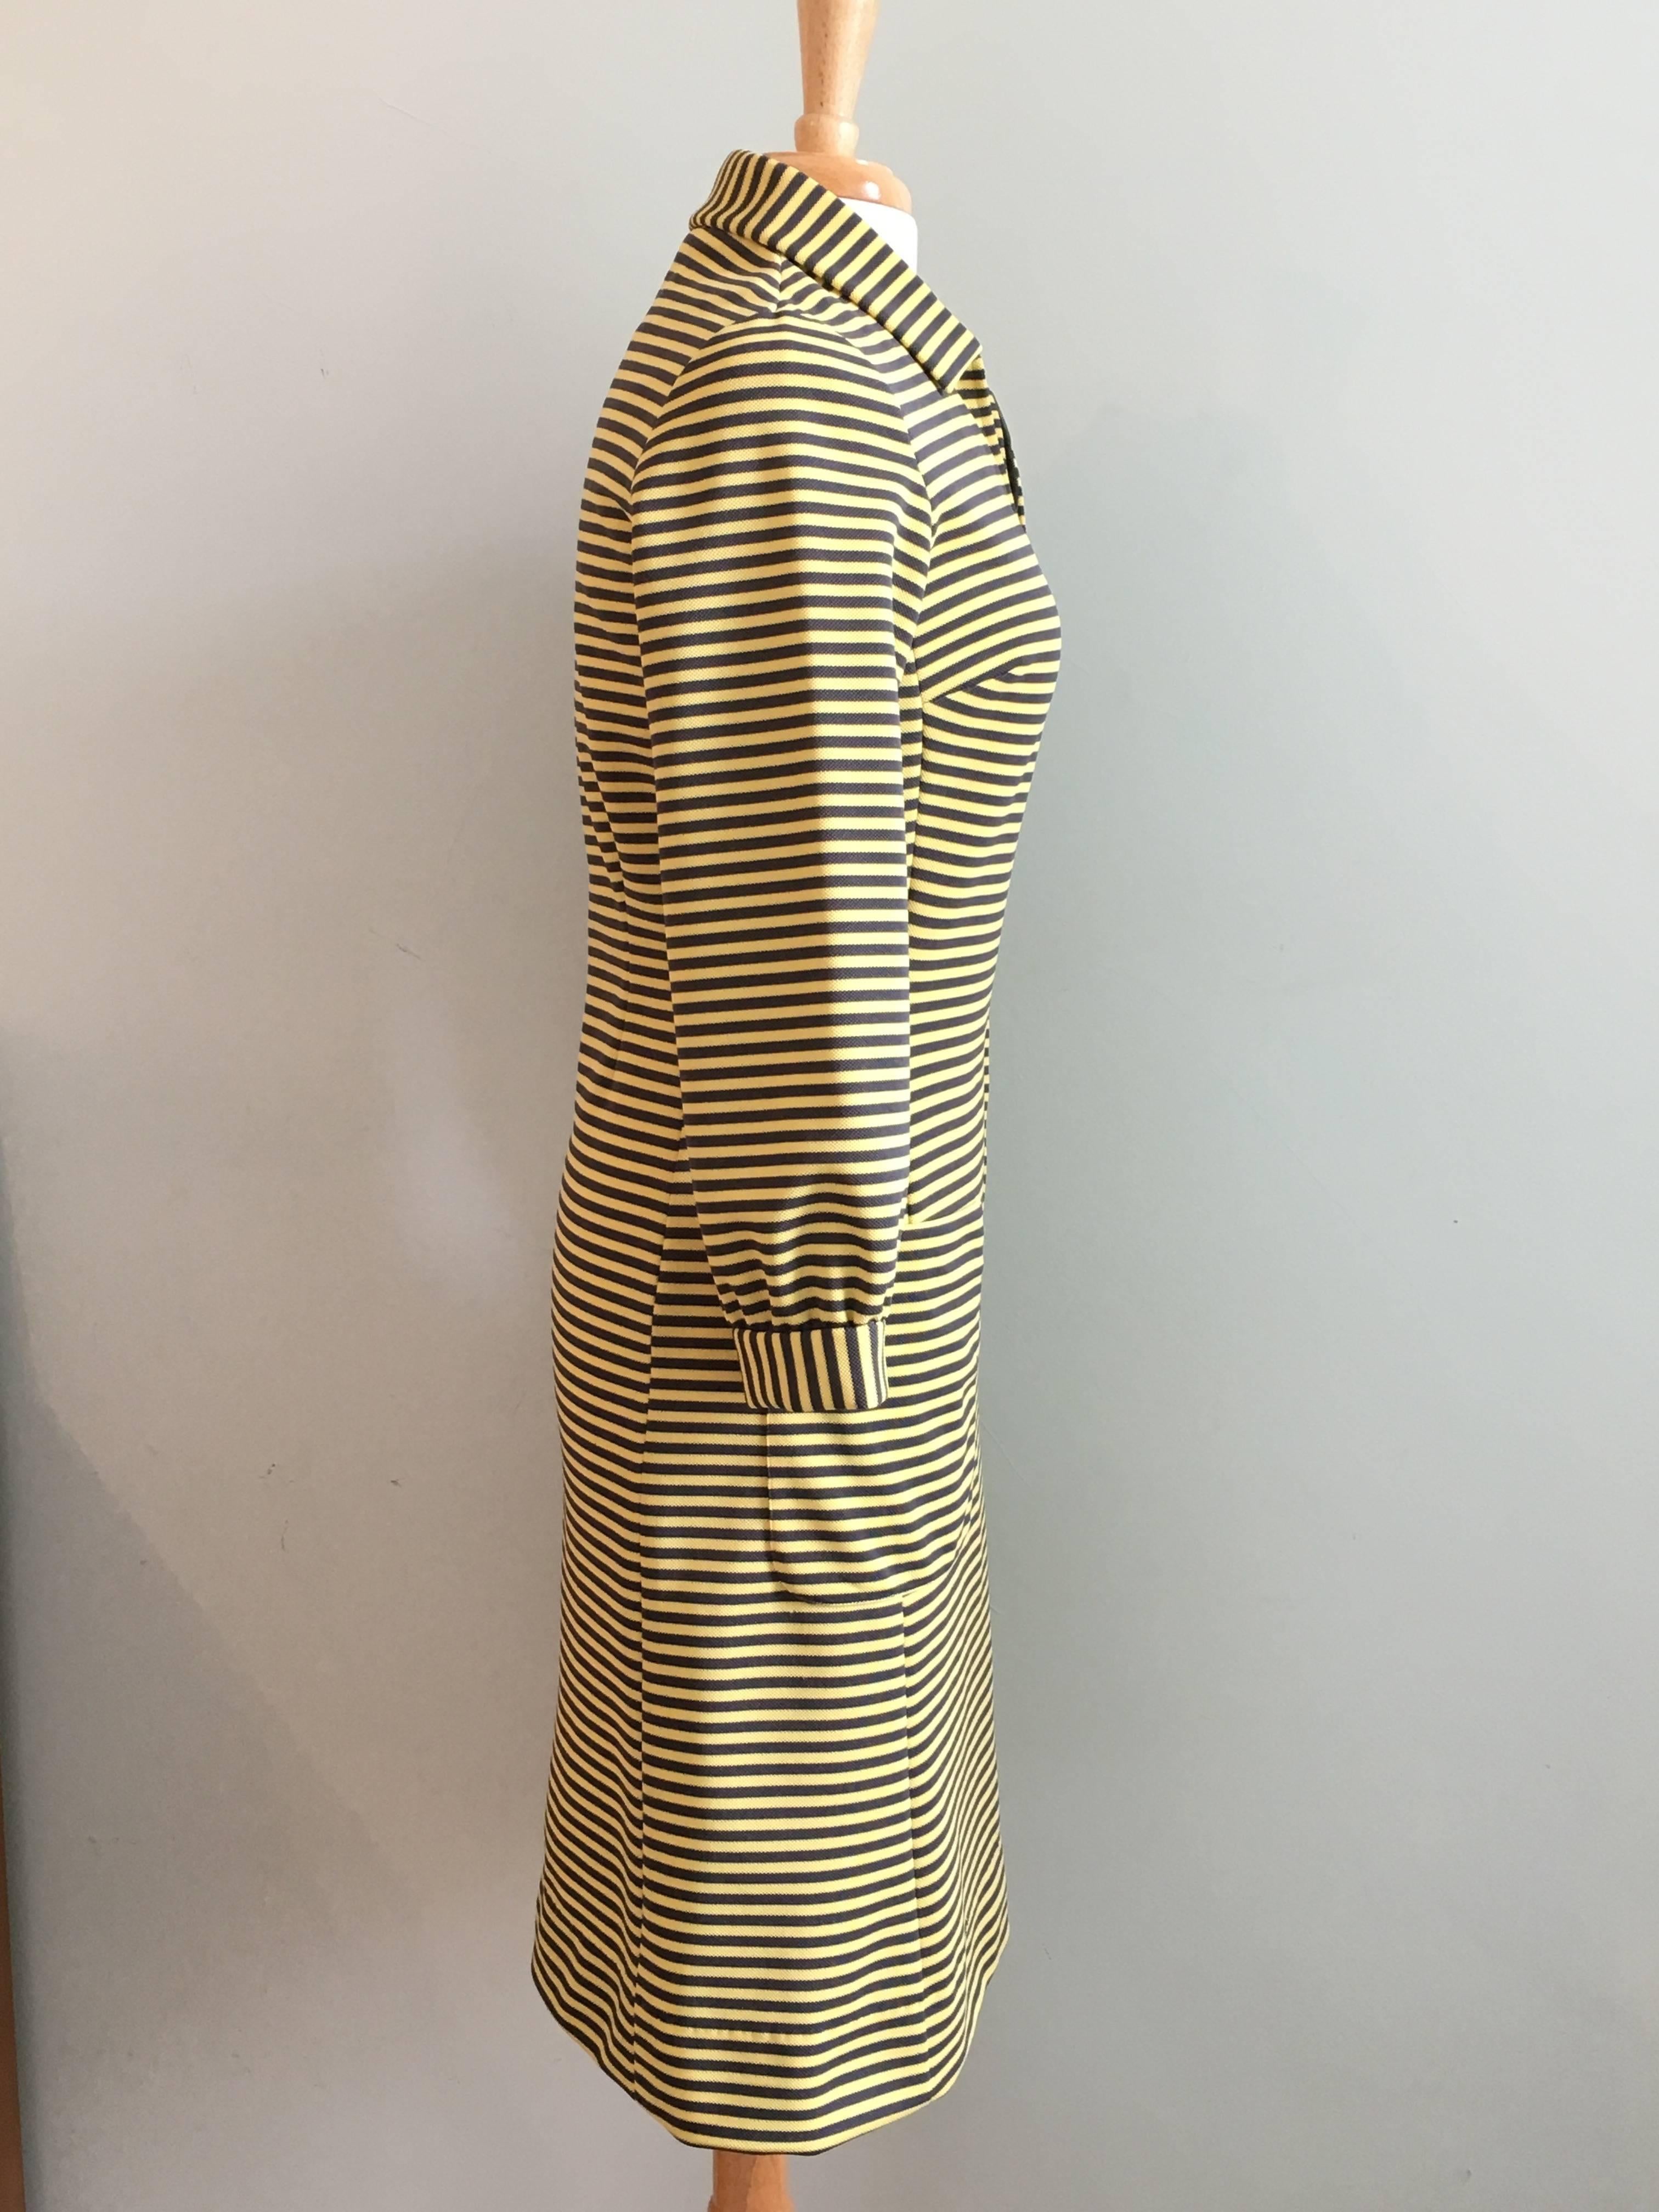 This is a 1970s yellow and grey knit striped dress from Chemise Lacoste. It zips up the front and has two patch pockets. It is in excellent condition and looks as if it was never worn. There is a signature embroidered alligator on the left front